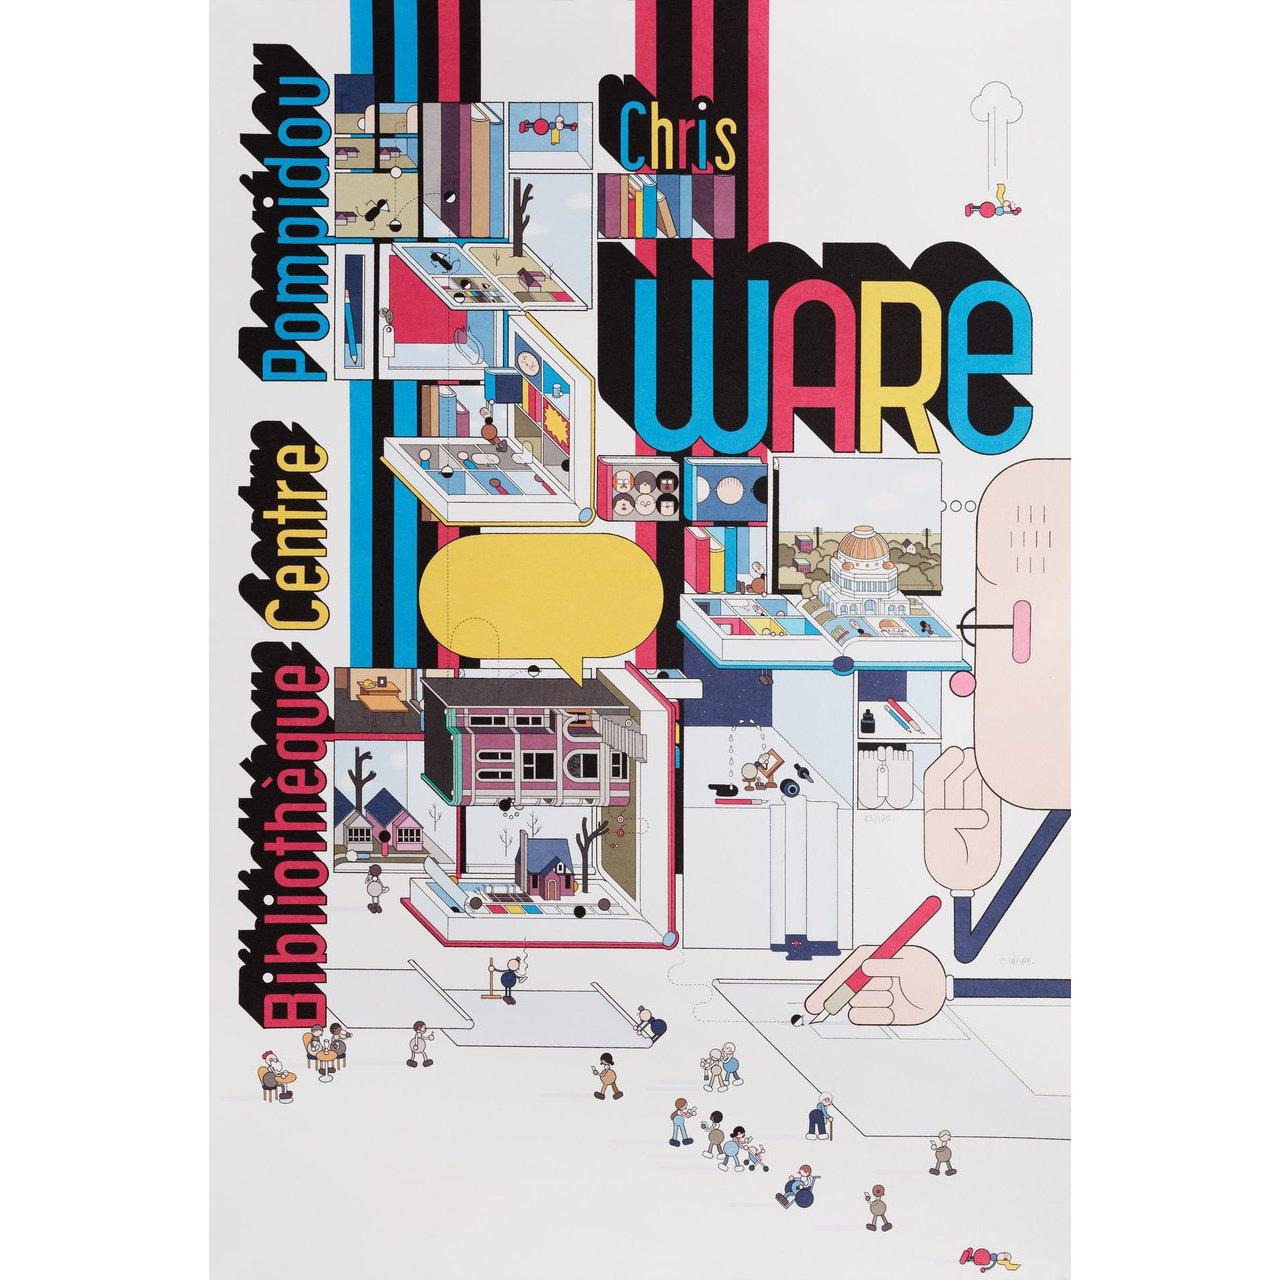 Original 2022 French petite poster by Chris Ware for the exhibition Chris Ware. Fine condition, rolled. Please note: the size is stated in inches and the actual size can vary by an inch or more.
 